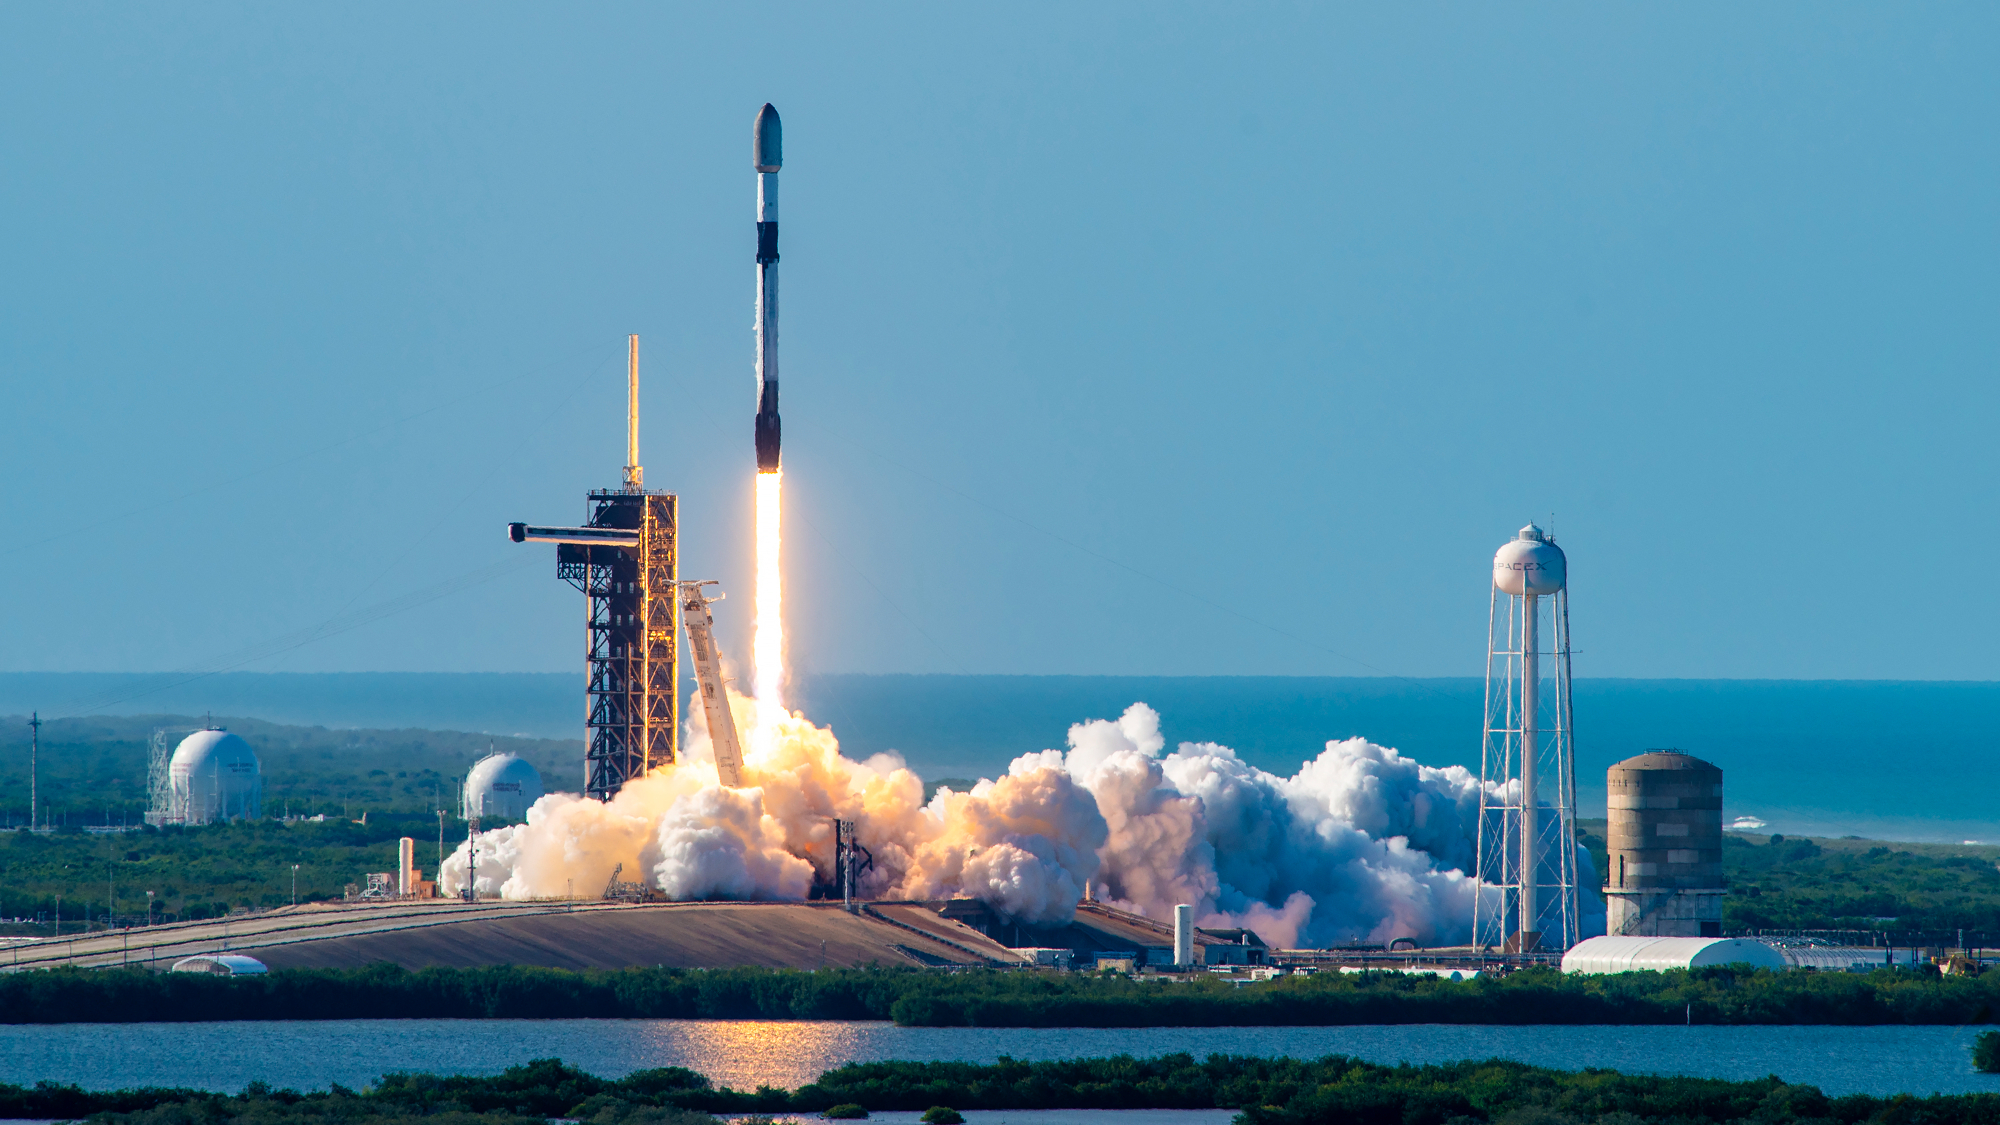 SpaceX Falcon 9 rocket launching 2 satellites on record-tying 20th flight today Space